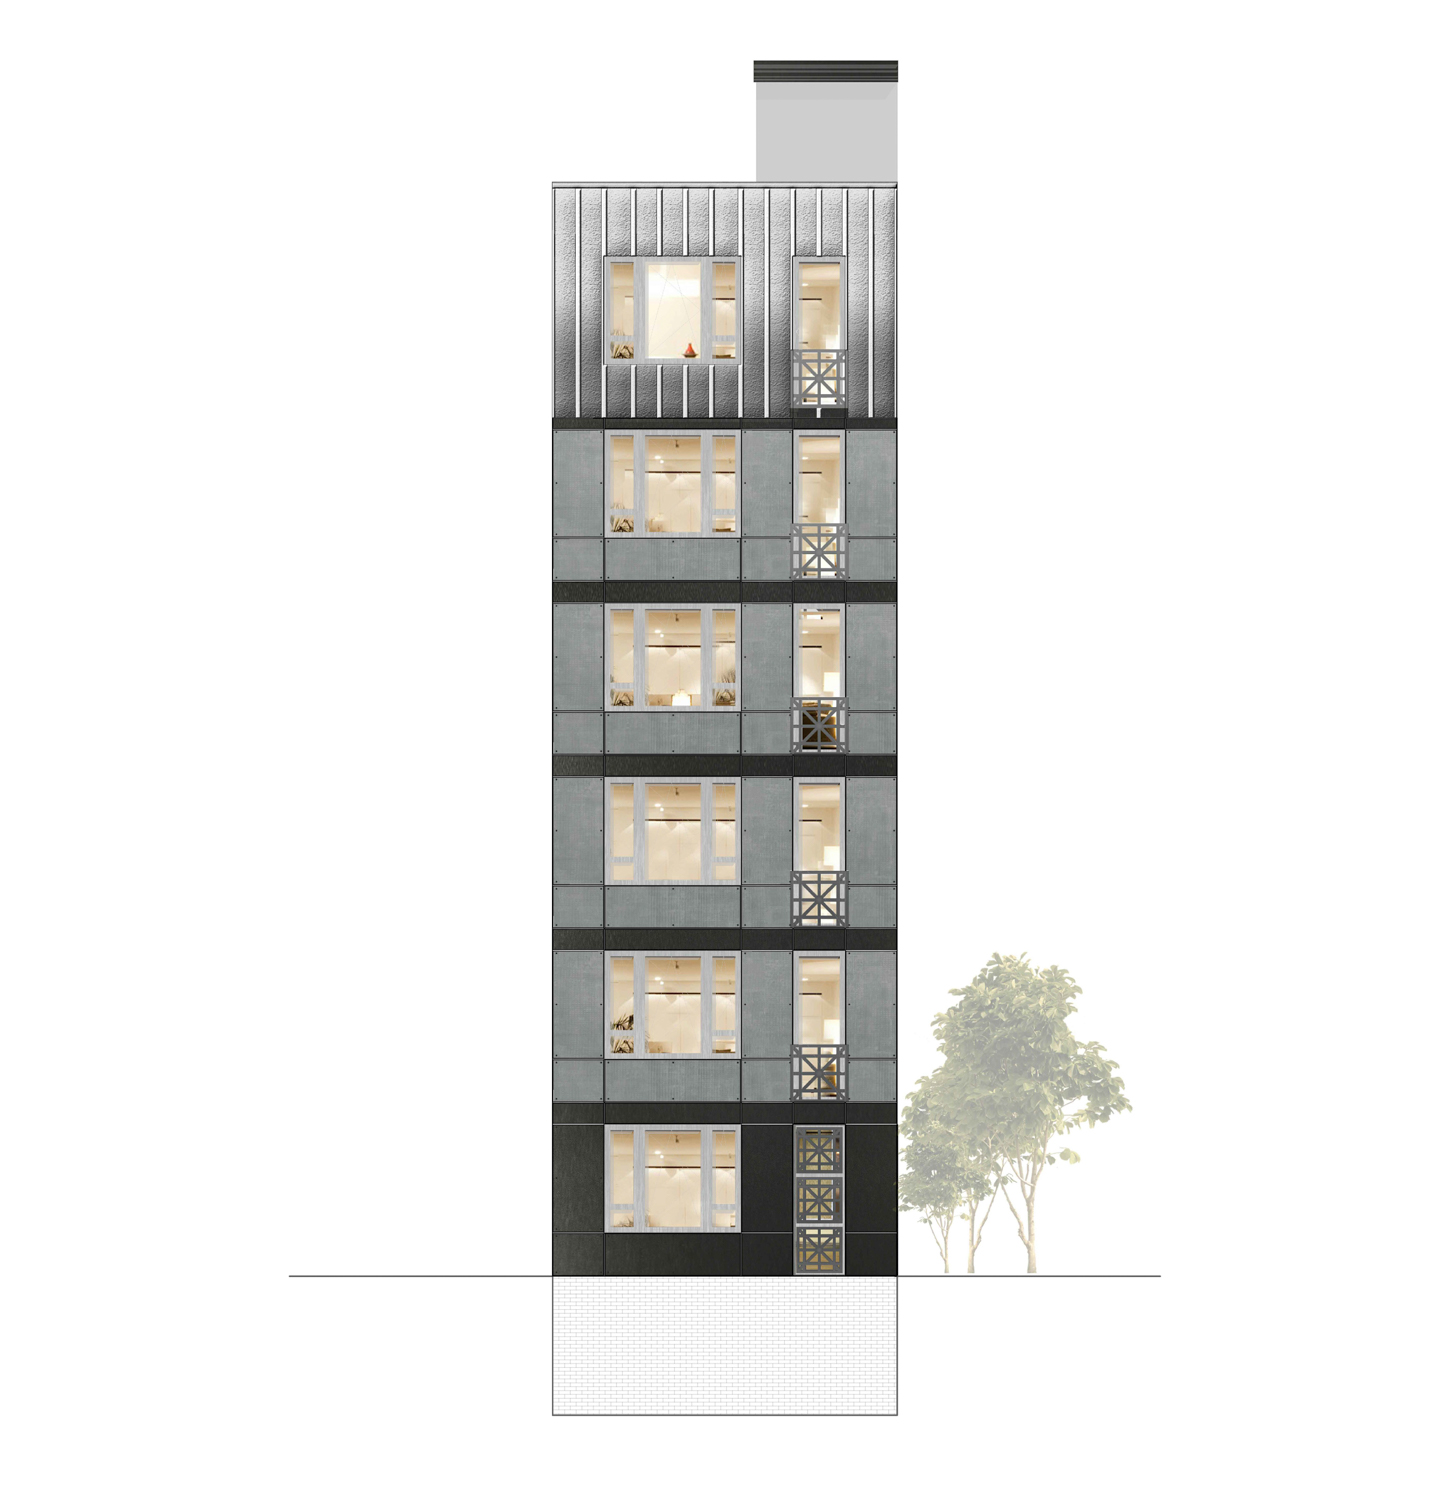 110 West 123rd Street, rendering by Shahrish